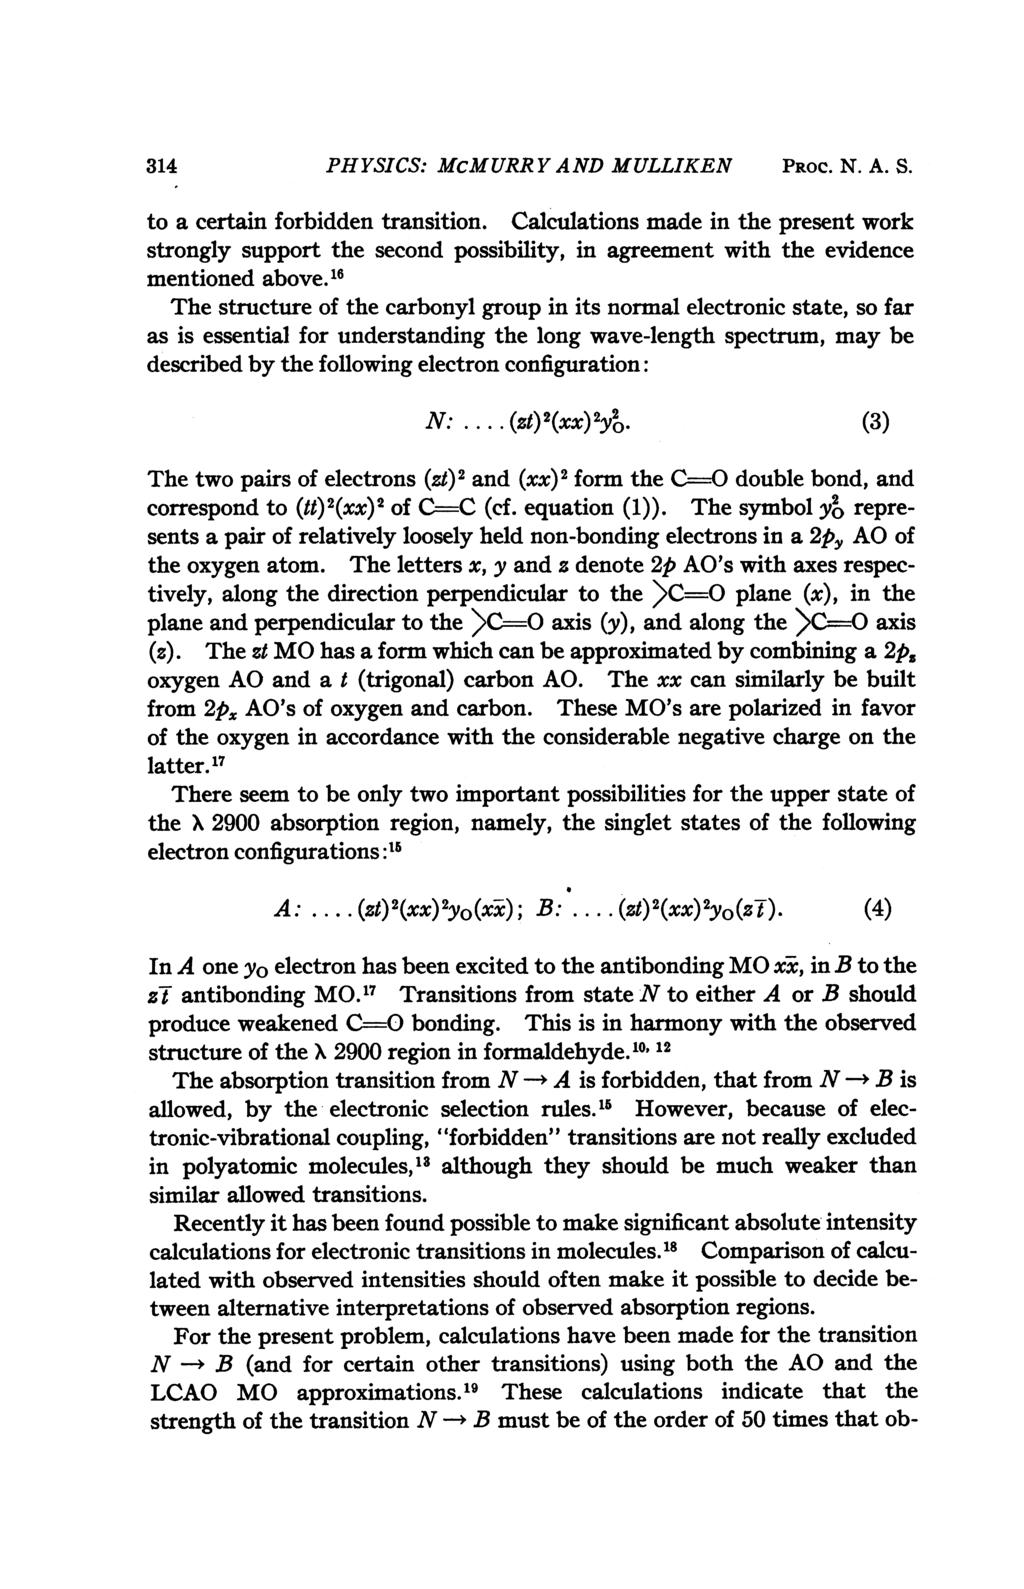 314 PHYSICS: McMURR Y AND MULLIKEN PROC. N. A. S. to a certain forbidden transition.